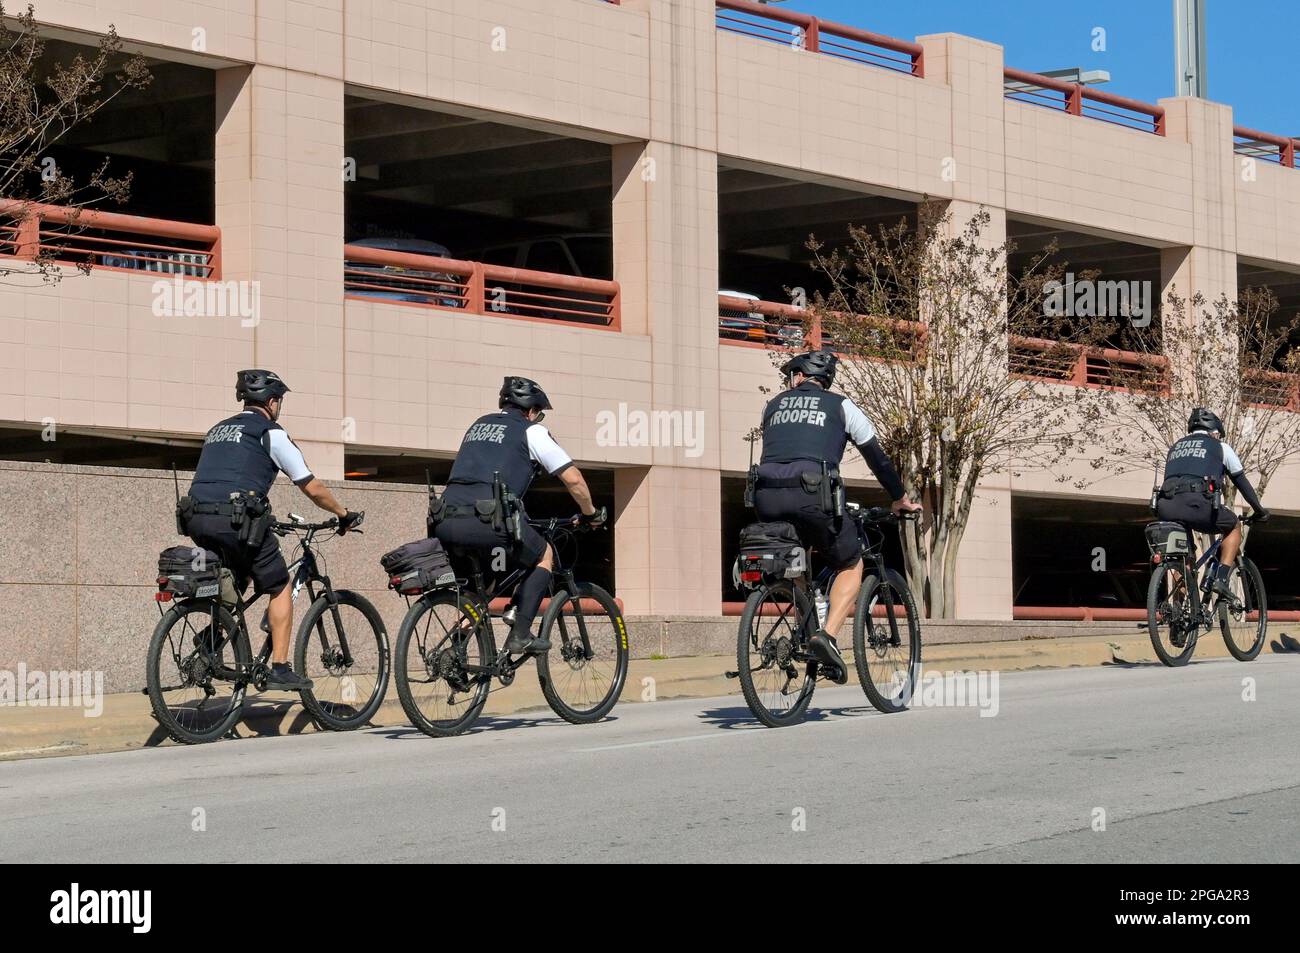 Austin, Texas, USA - February 2023: Group of State Troopers cycling on patrol in the city centre Stock Photo